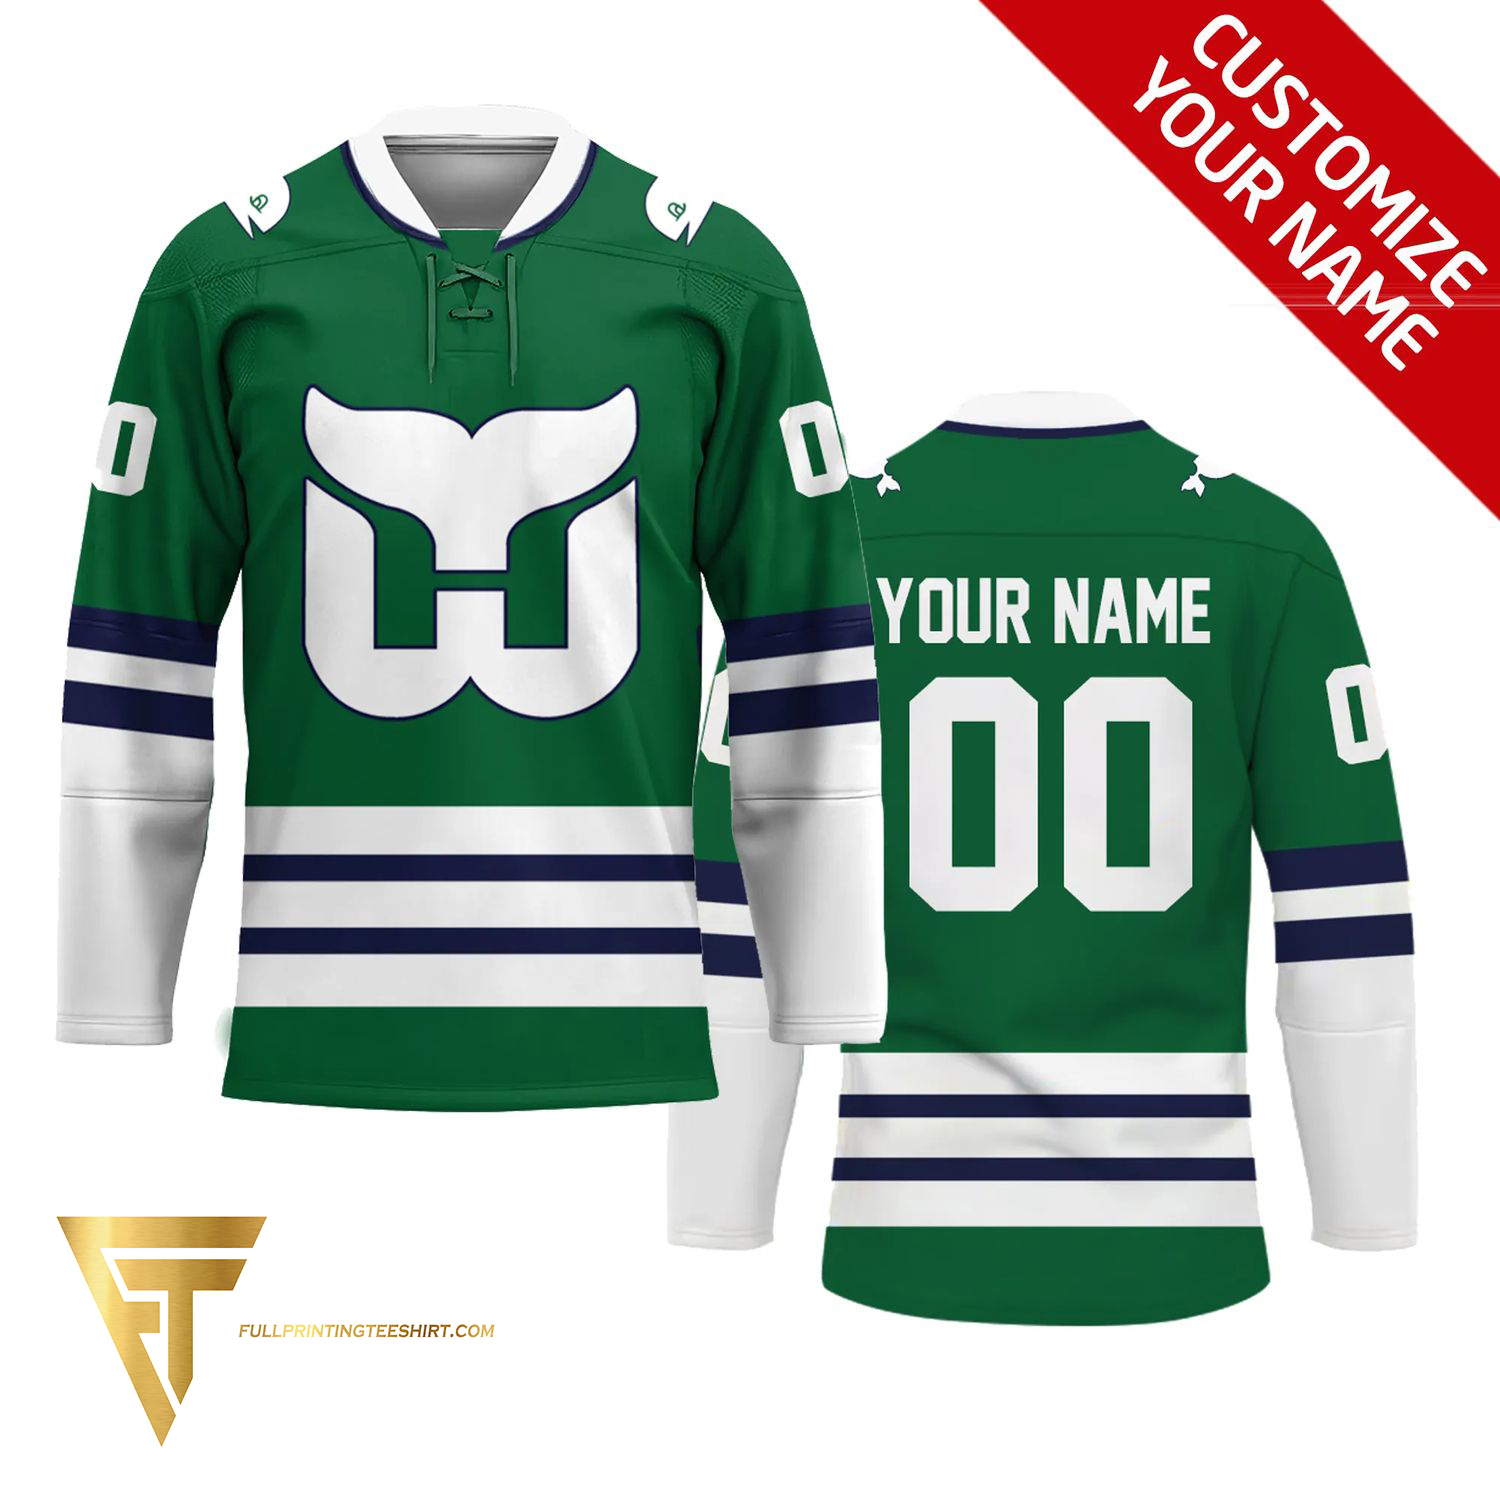 Hartford Whalers Gear, Whalers Jerseys, Hartford Whalers Clothing, Whalers  Pro Shop, Hockey Apparel